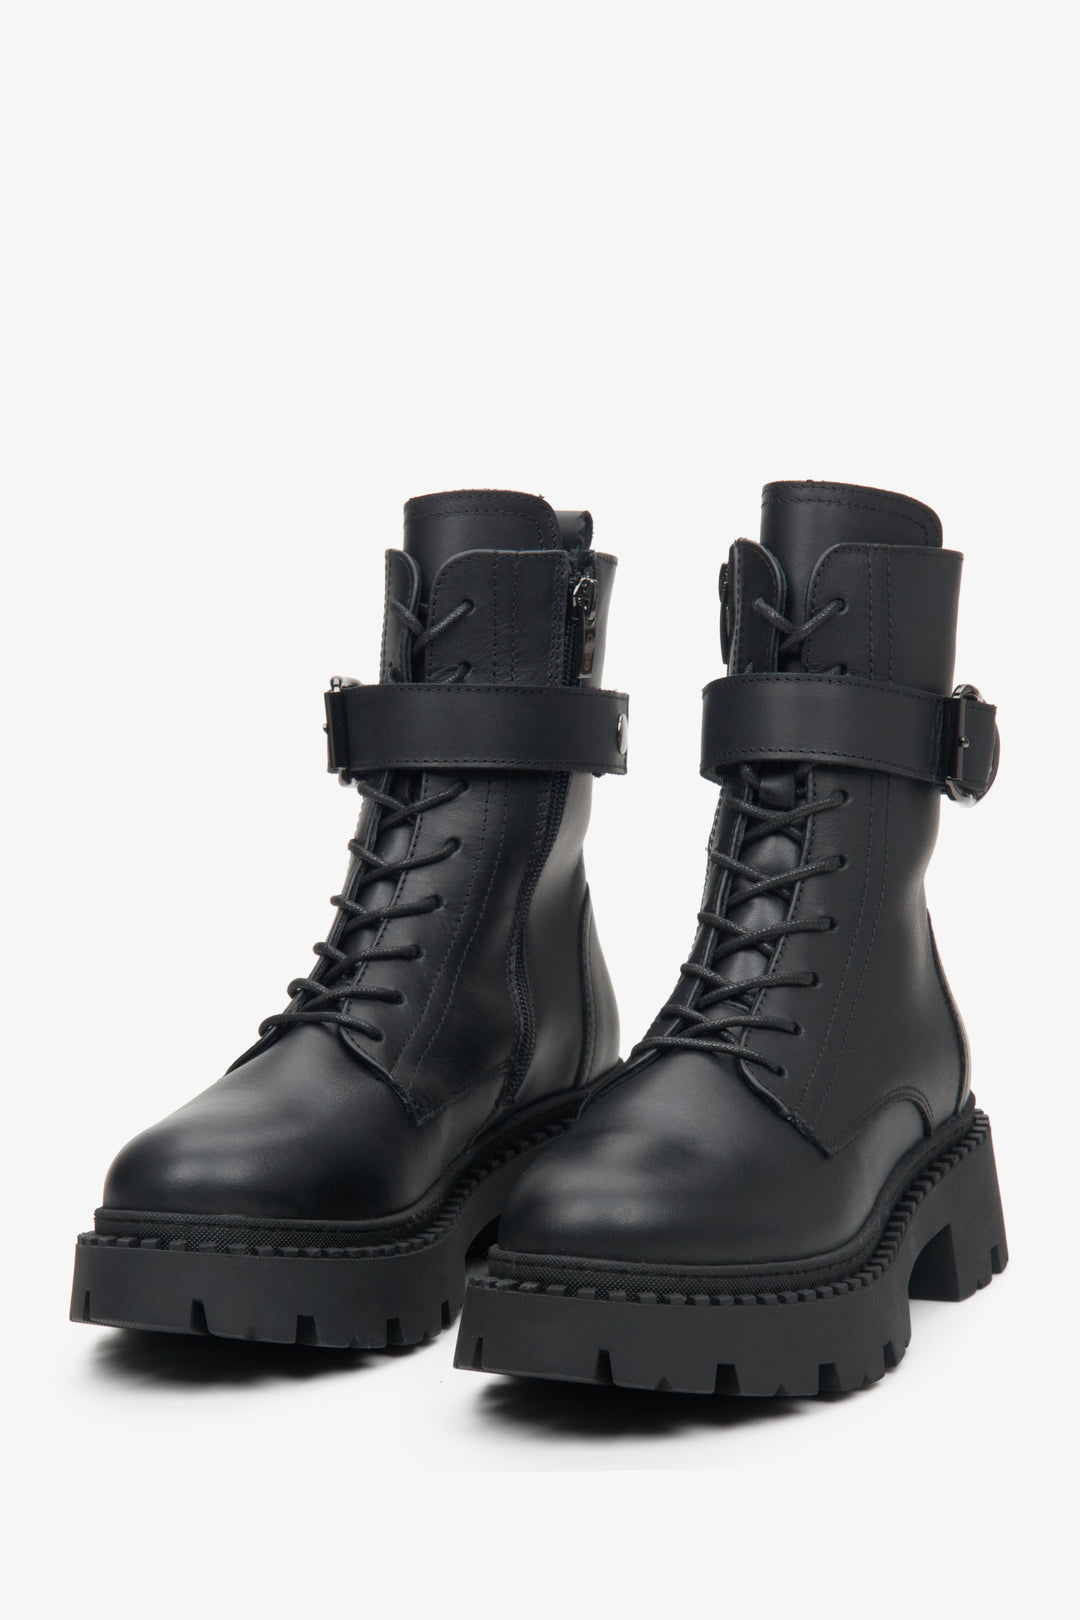 Leather, black Estro women's winter boots with a decorative strap - close-up on the toe.